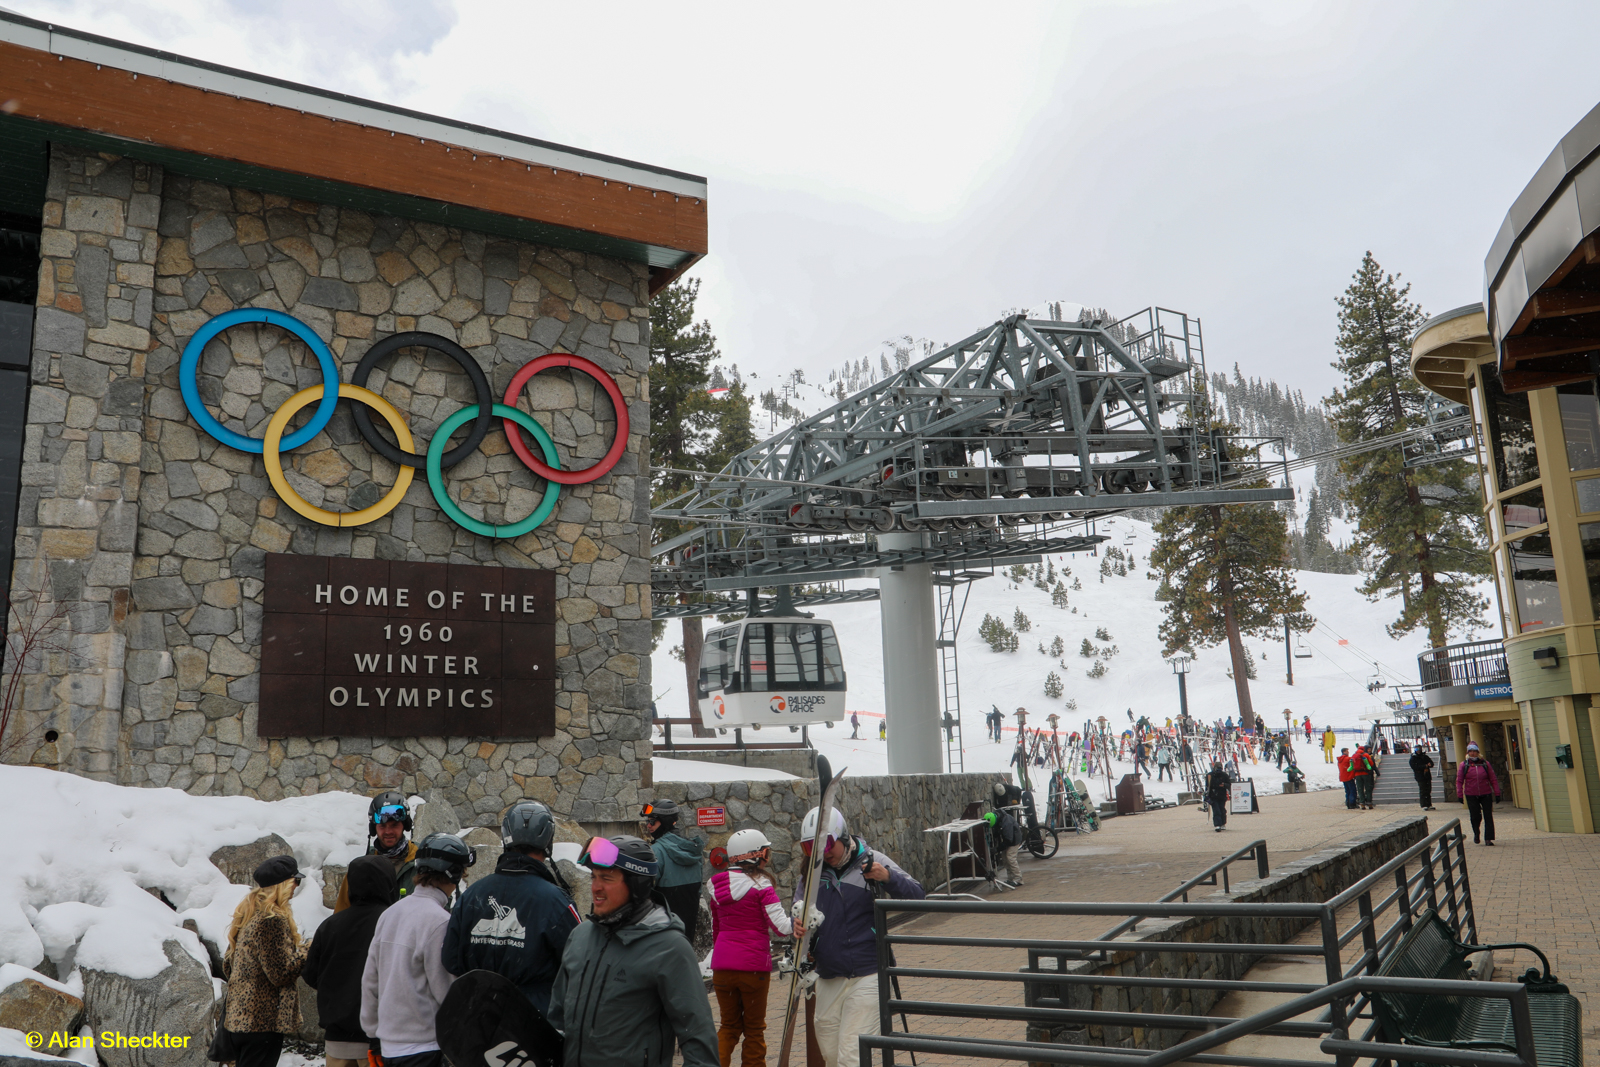 Palisades Tahoe, formerly Squaw Valley, home of the 1960 Winter Olympics